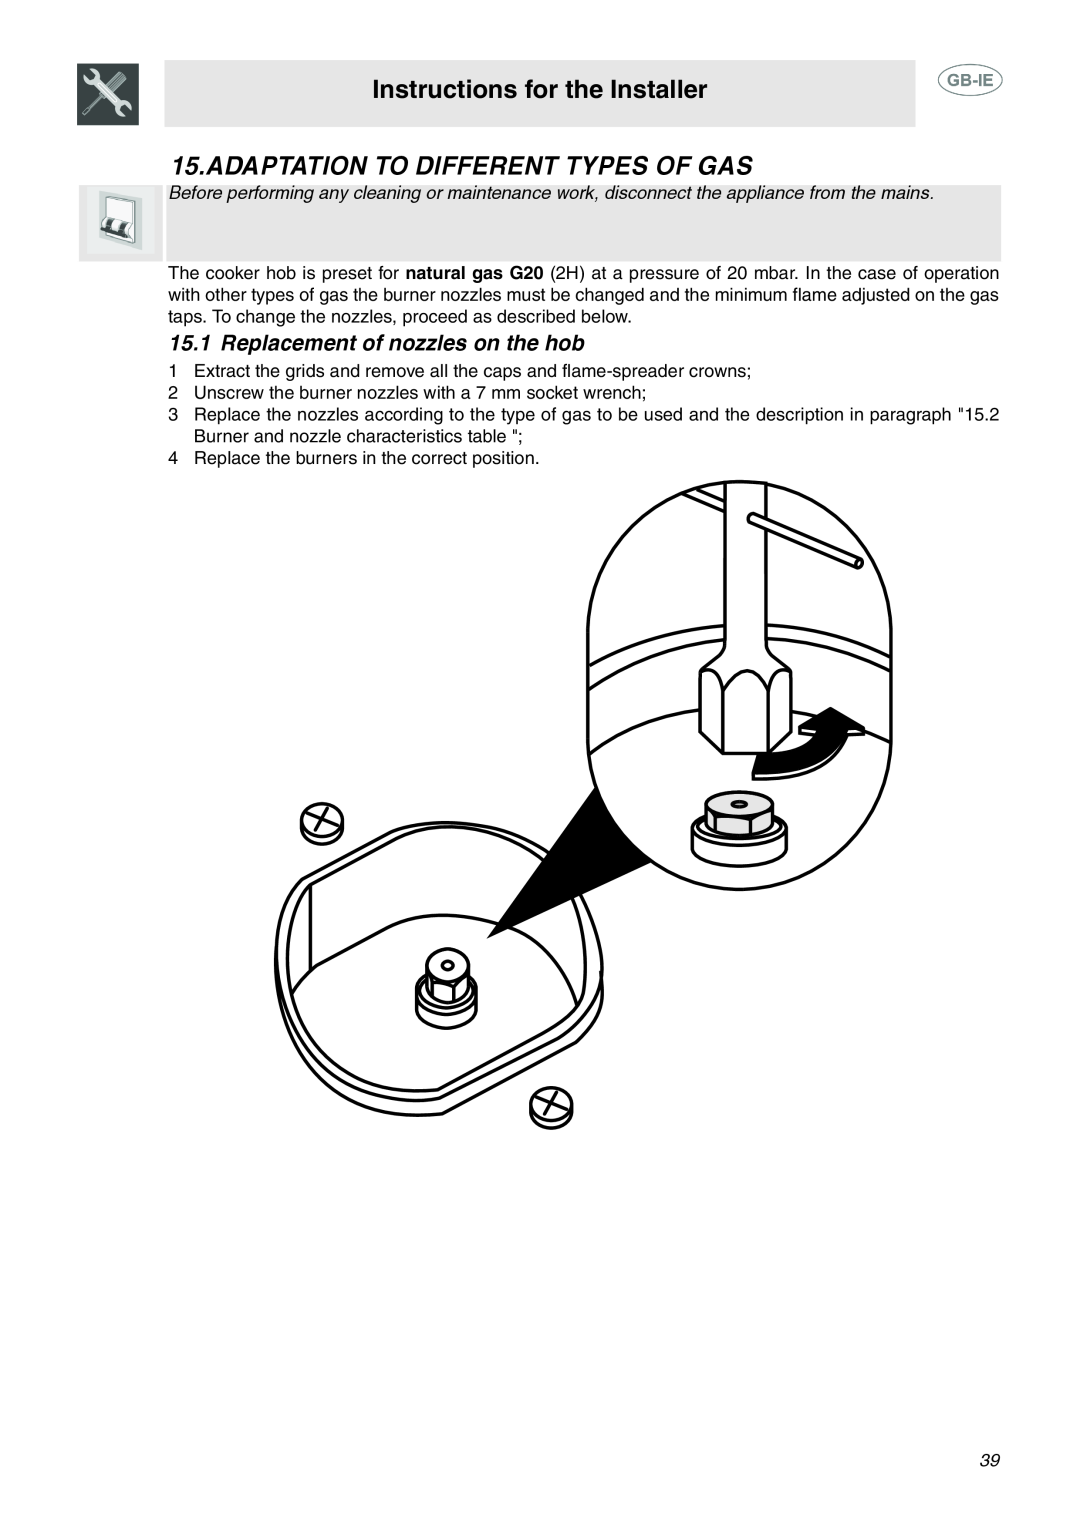 Smeg C6GMX manual Adaptation To Different Types Of Gas, Replacement of nozzles on the hob, Instructions for the Installer 